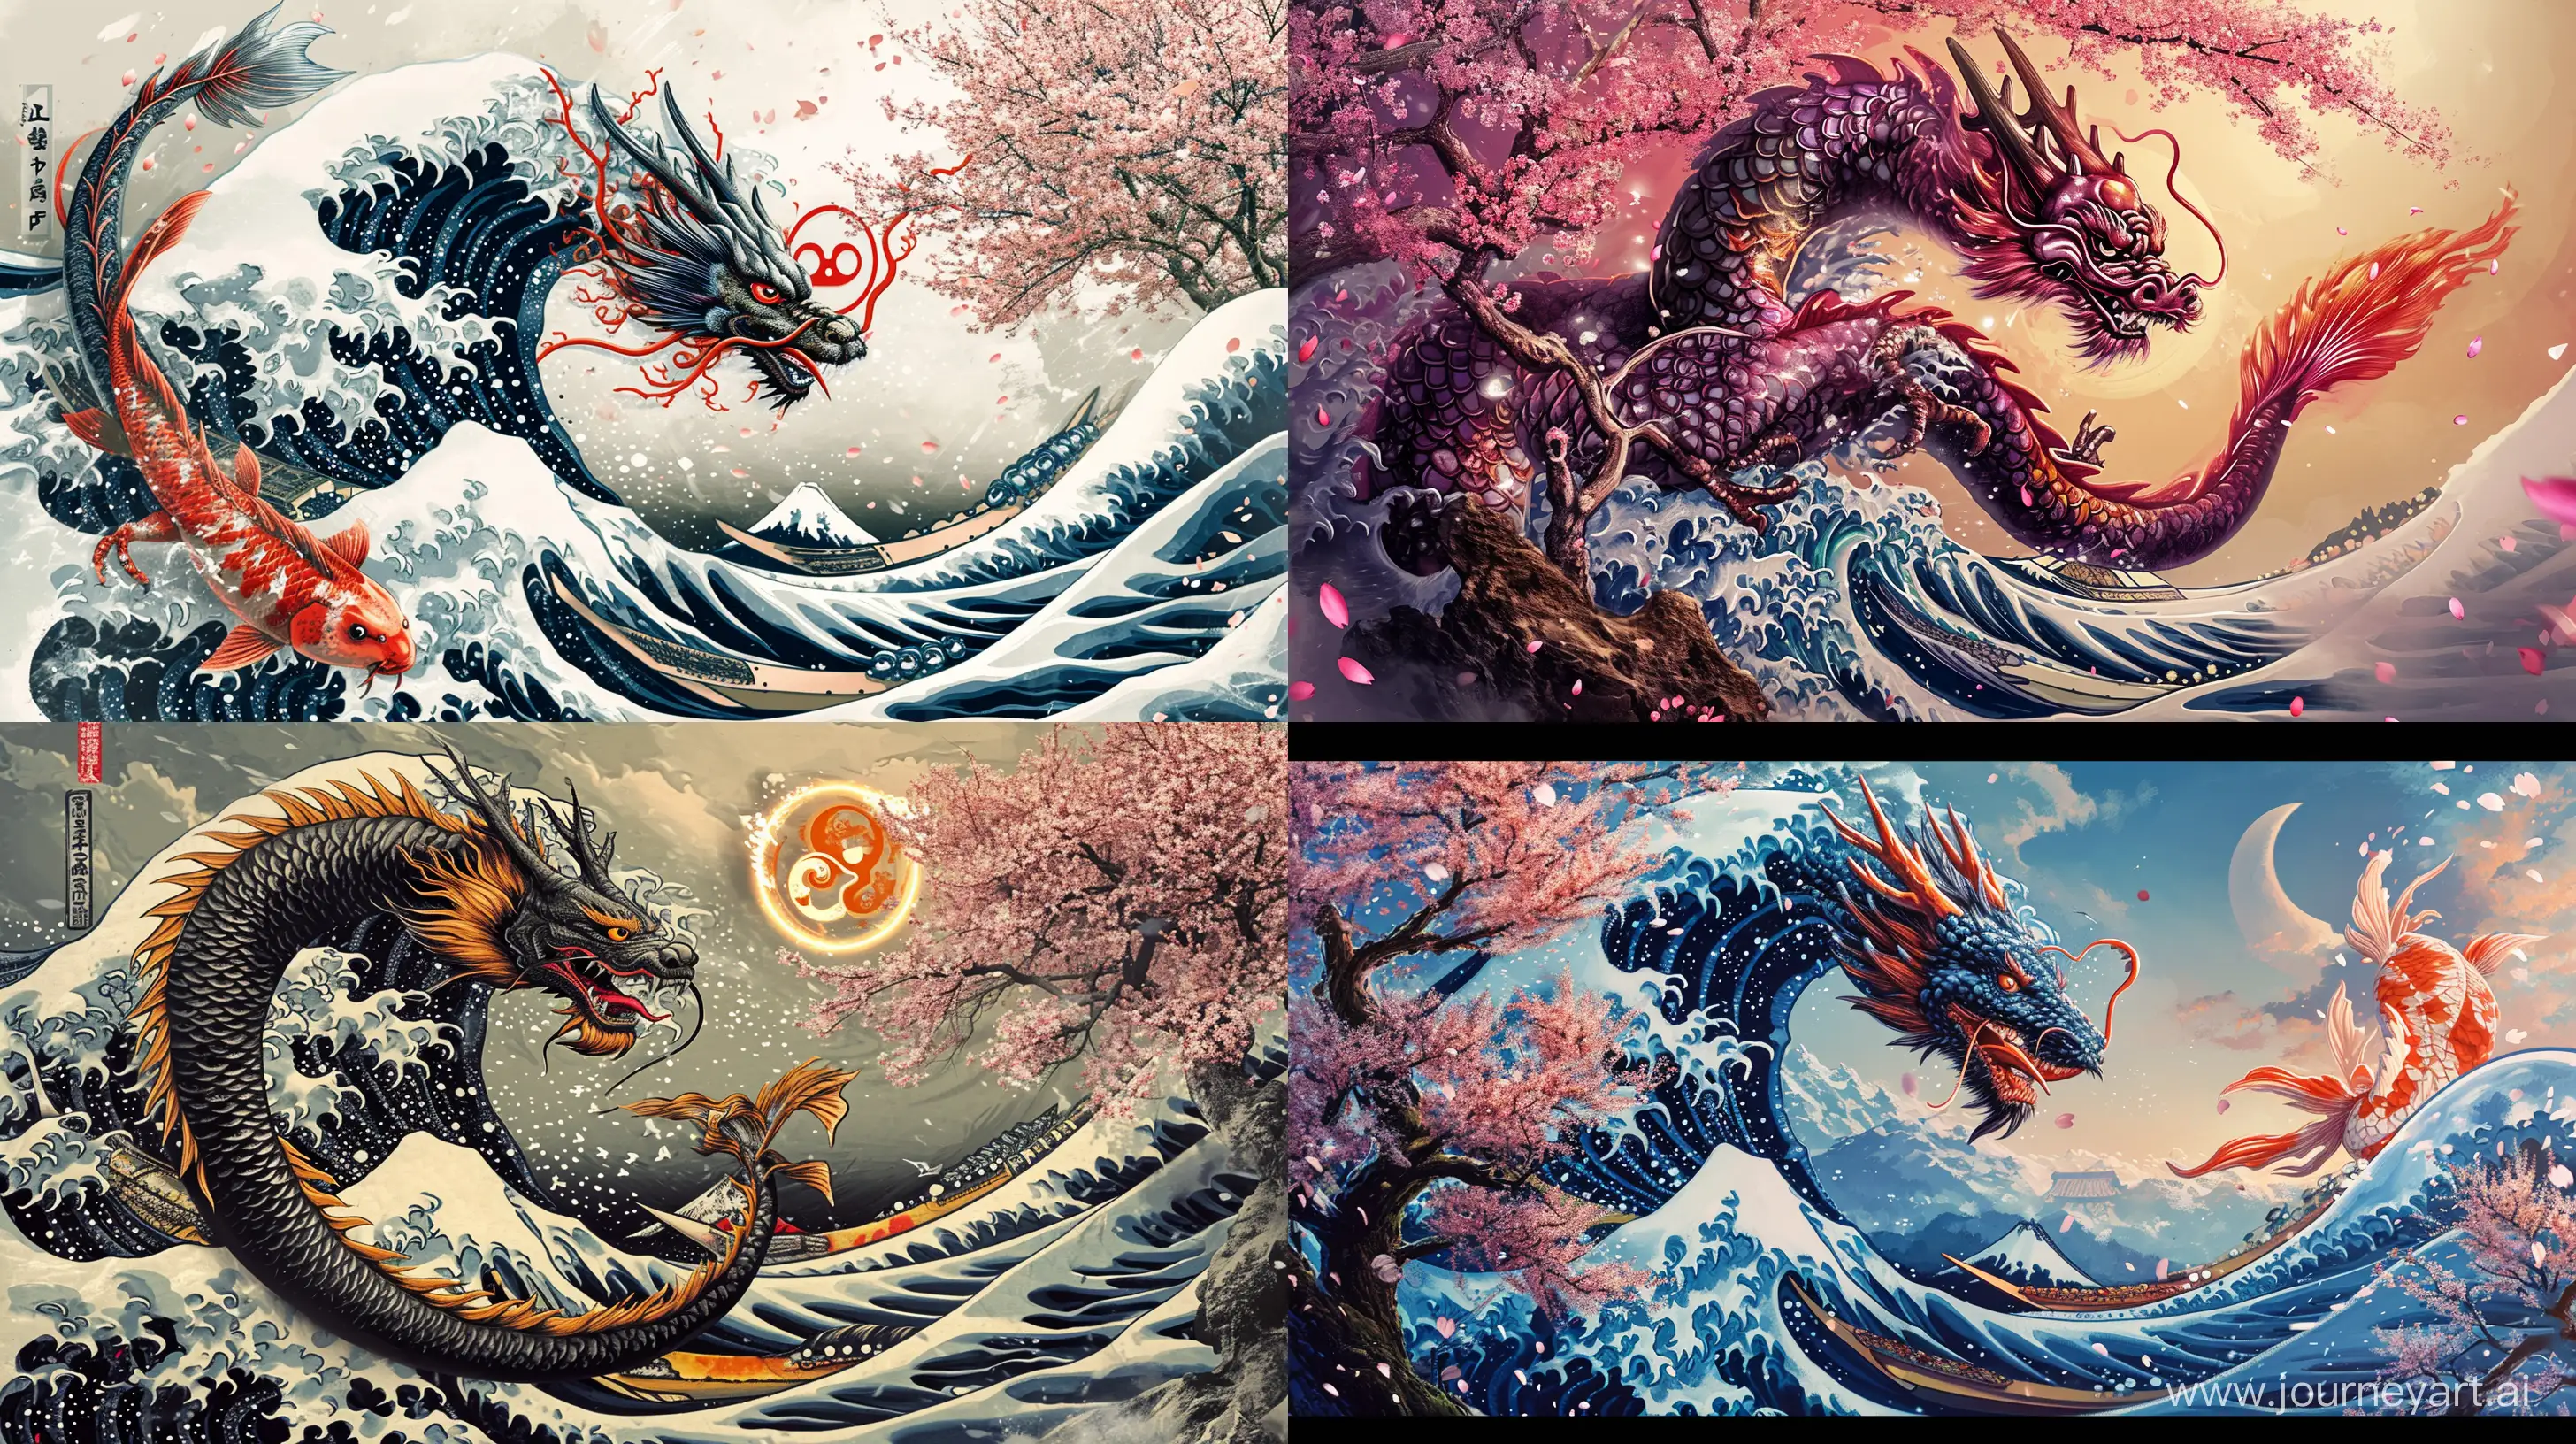  japanese dragon that is japanese style such as wave, koi fish, ying yang, with bakcgound sakura tree in 4k --v 6.0 --ar 16:9
